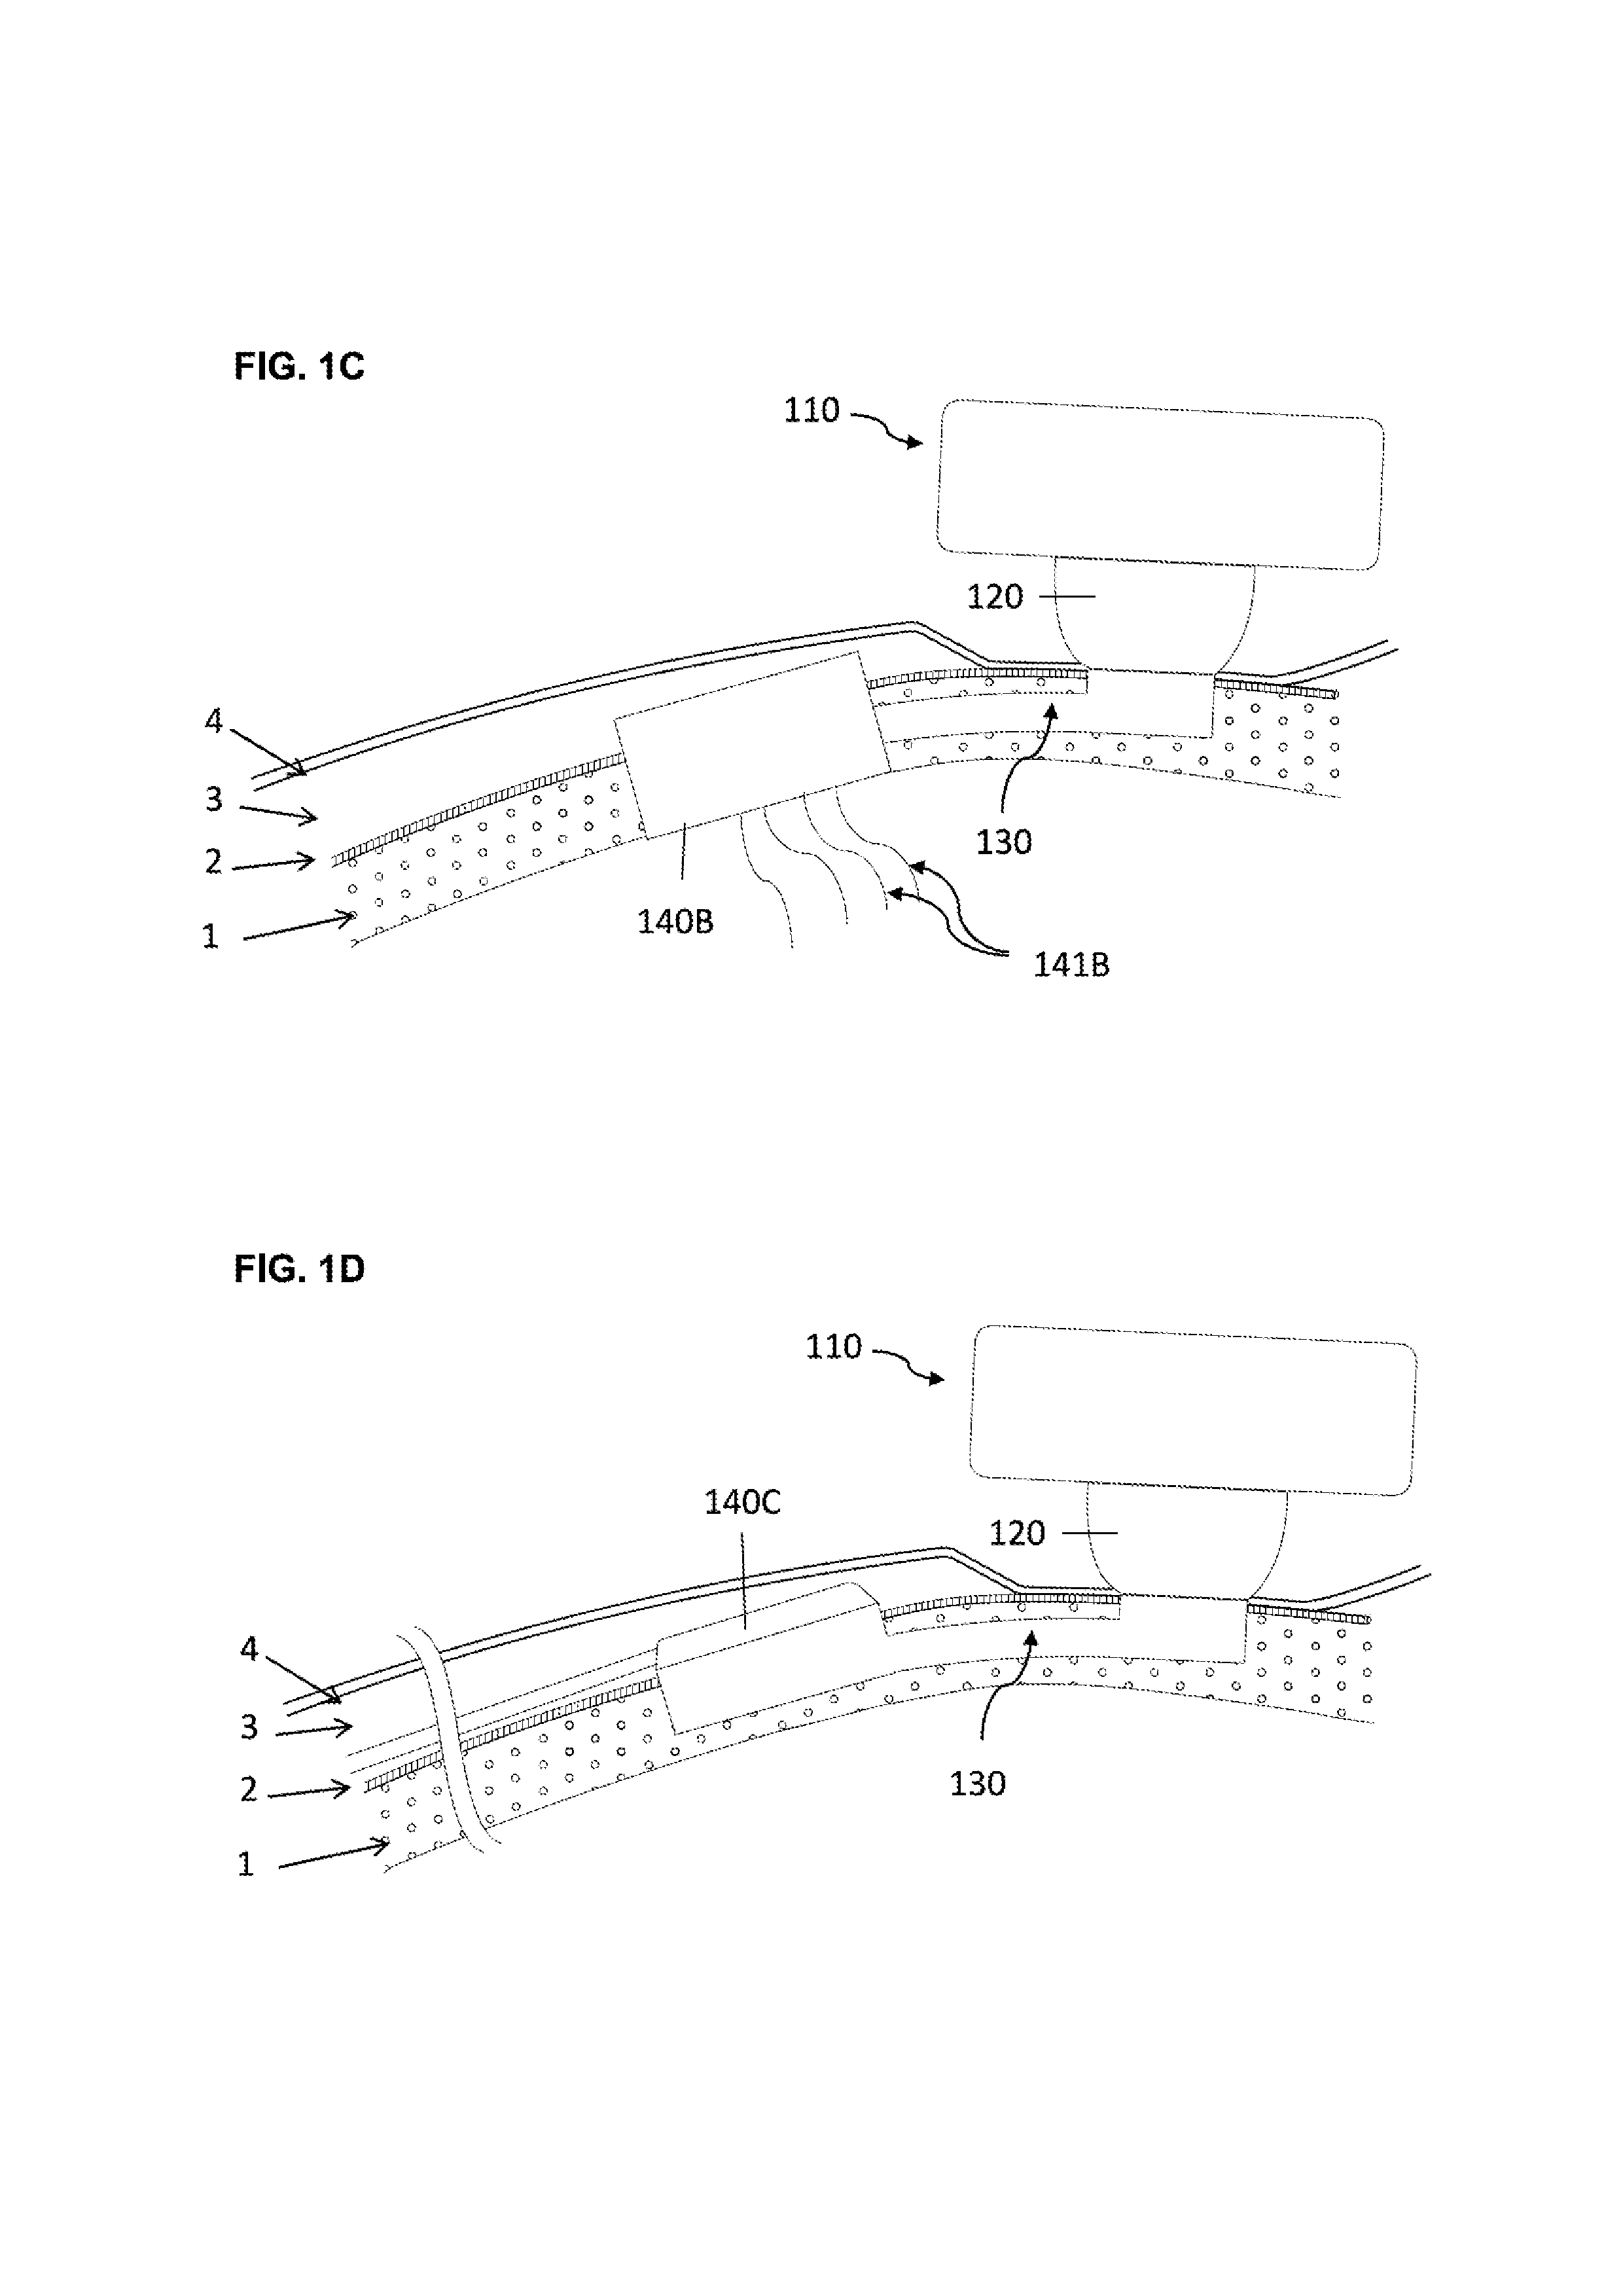 Percutaneous connection assembly for active medical devices